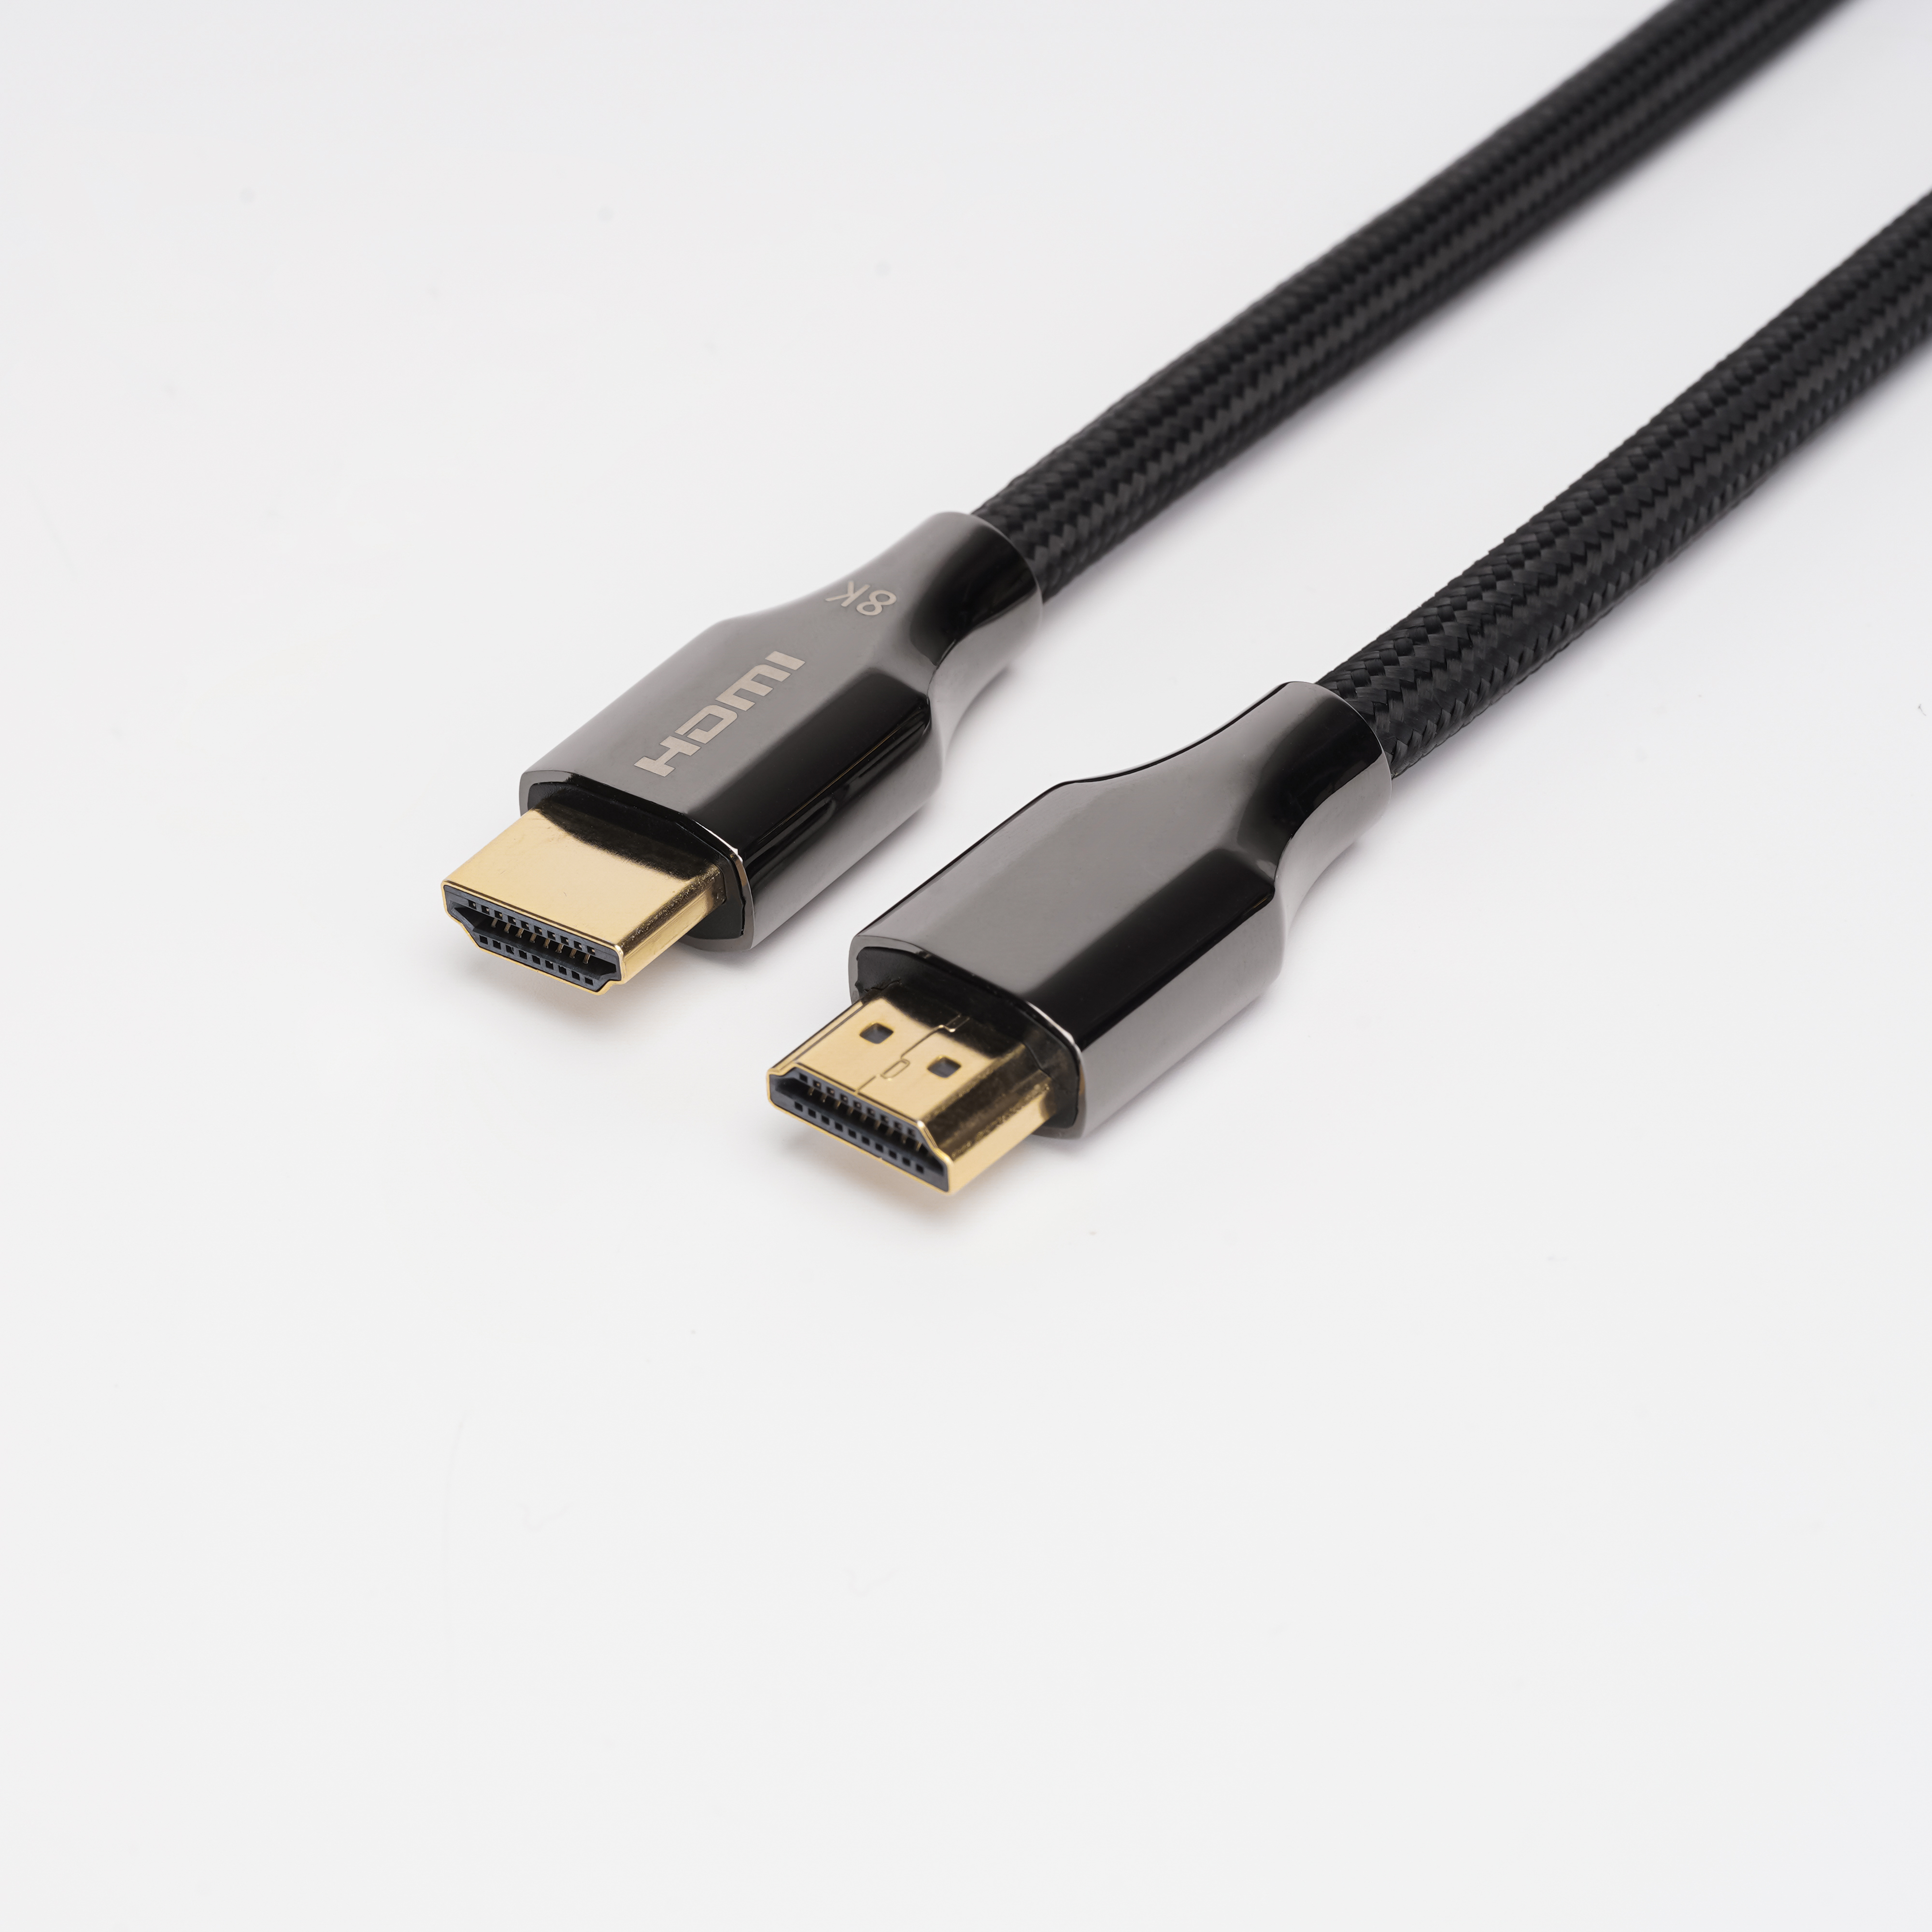 8K HDMI Cable,HDMI 2.1 Cable, 48Gbps HDCP2.2 4K@120Hz and 8K@60Hz eARC, Compatible with Apple TV,Roku,Samsung QLED,Sony LG,Nintendo Switch,Playstation,PS5,PS4,Xbox One Series X, Dolby